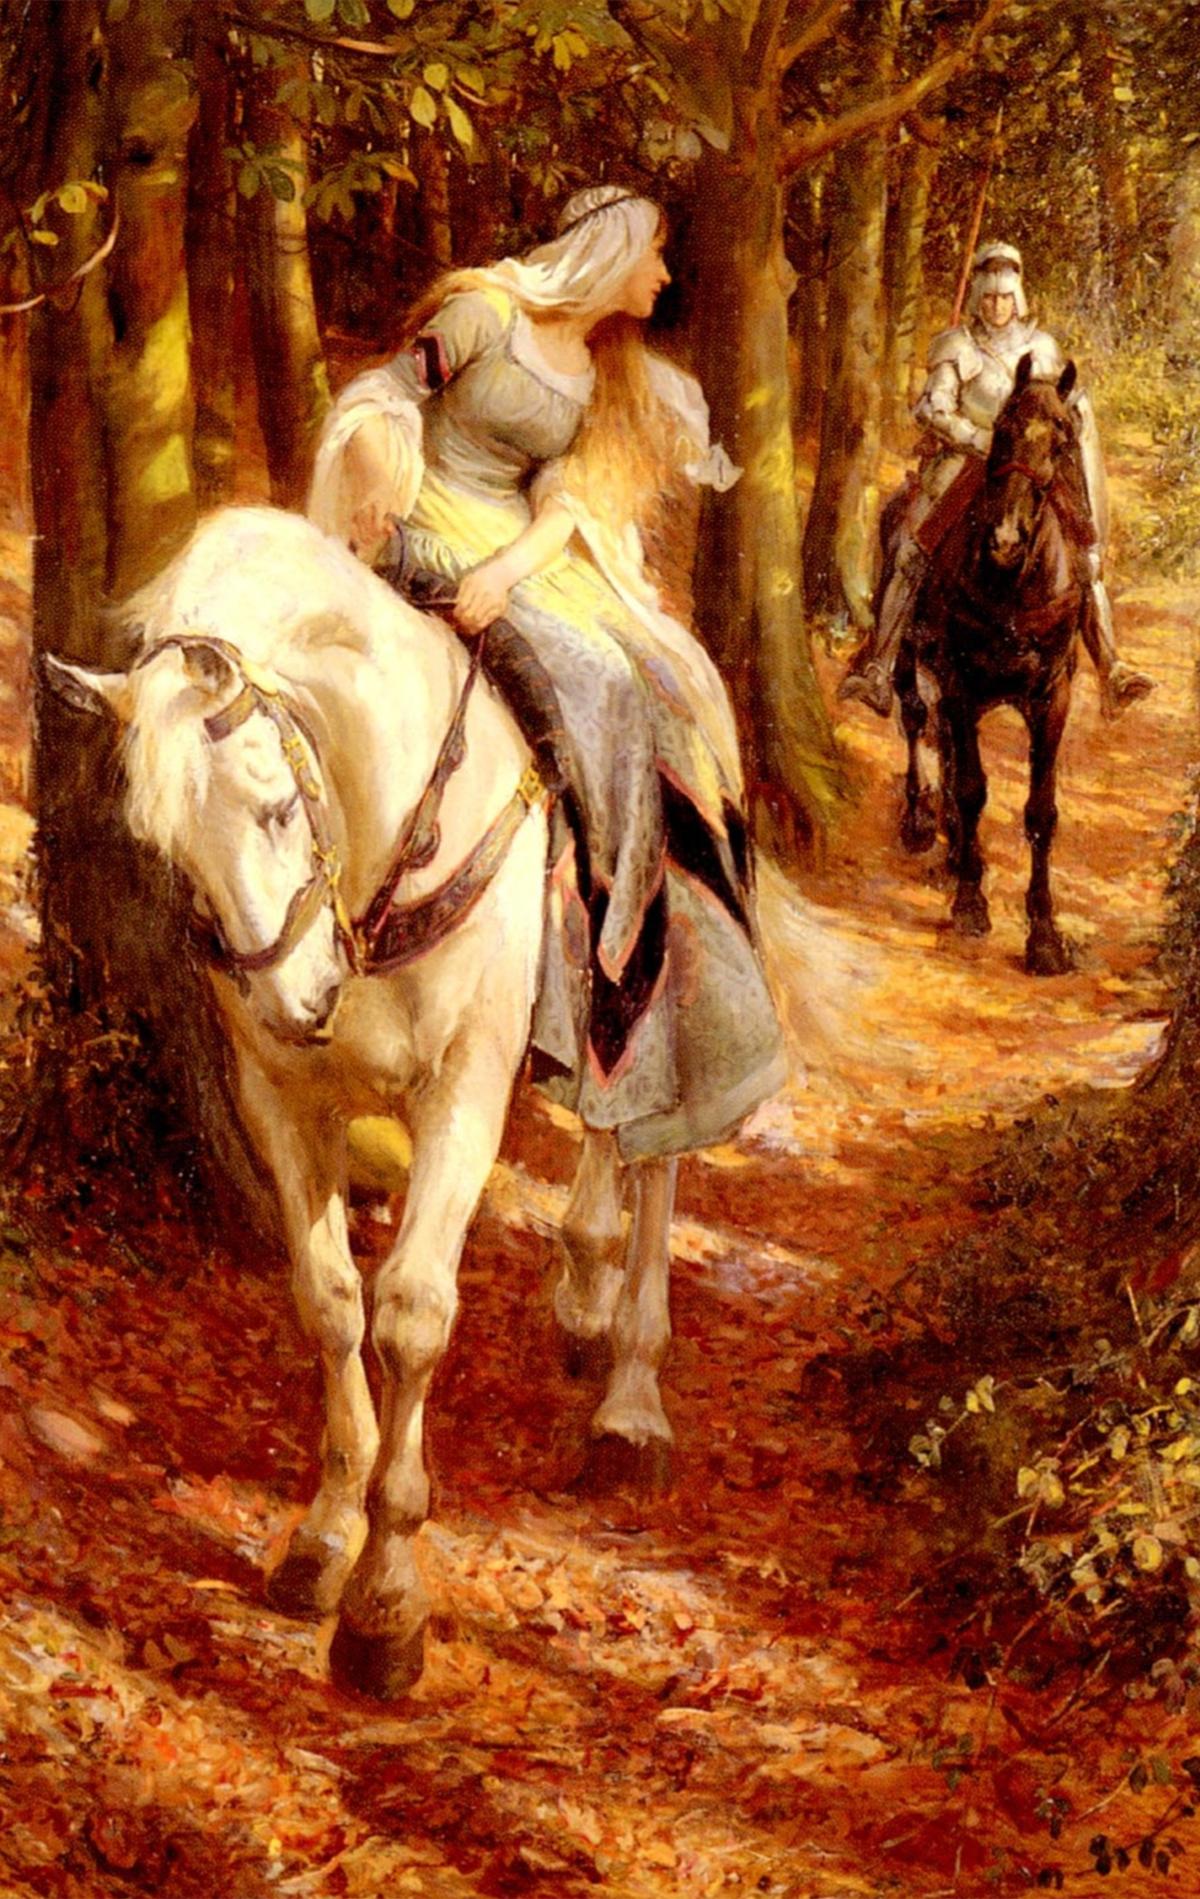  "Enid and Geraint," 1907, by Rowland Wheelwright. Oil on canvas. (Art Renewal Center)